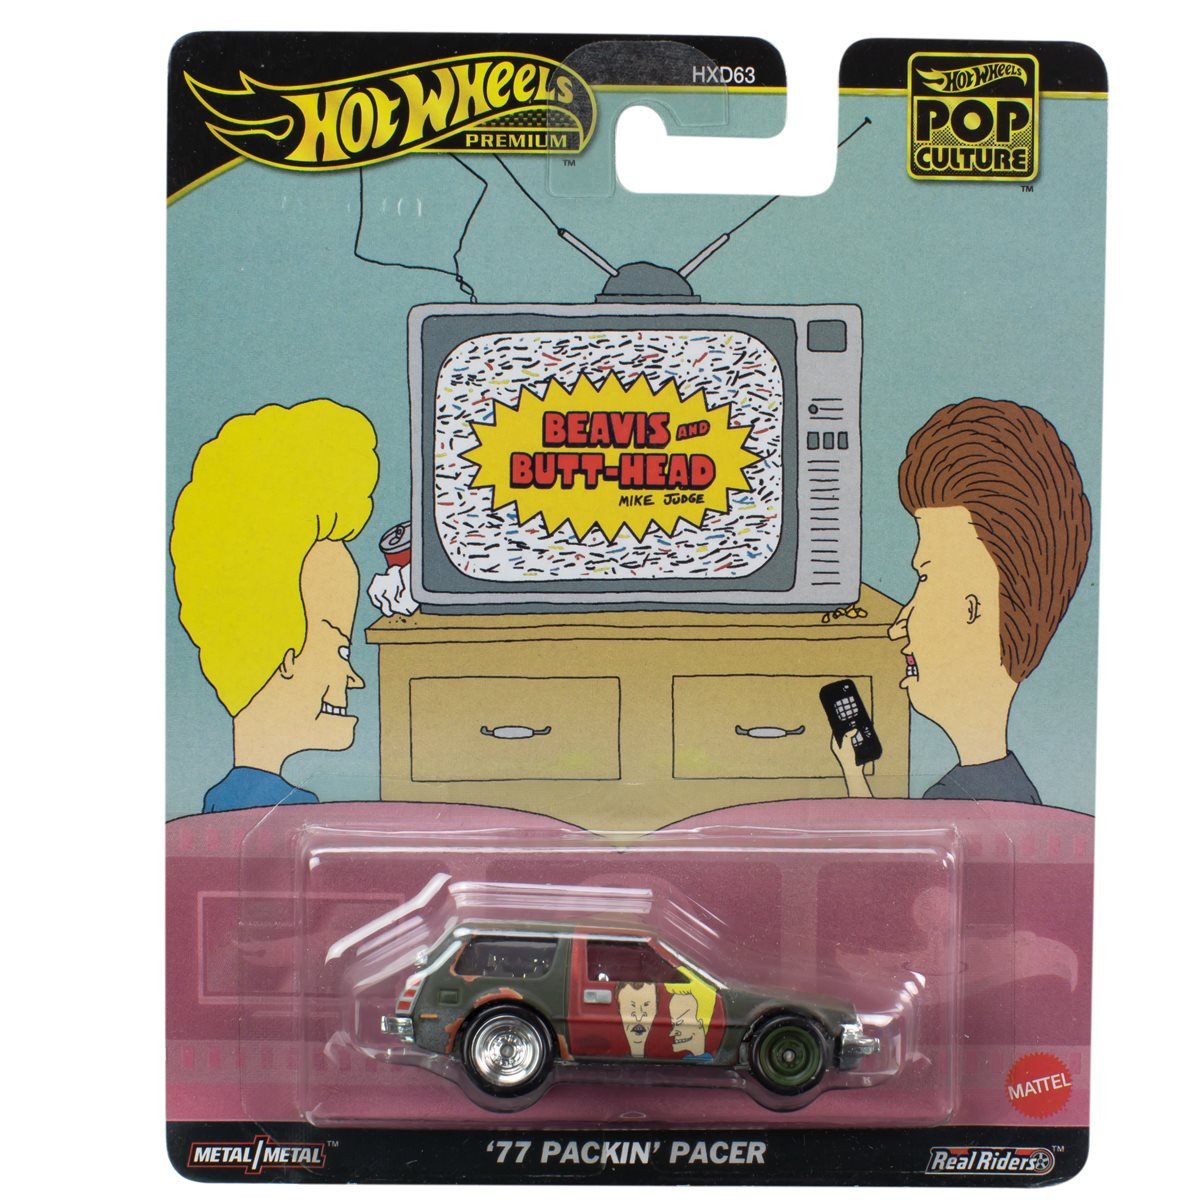 ▶️HotWheels 2024◀️ 🏎️'77 Packin Pacer #Beavis #Butthead #hotwheels #diecast #ebay #amazon #Toys #toycars #AFOL #Ad #Modelcar #cars #ホットウィール #ミニカー #トミカ #FYP #Premium #NISMO #Collectibles #classiccars #collection #diecastmalaysia 🎁Link➡ebay.us/p1F5h7